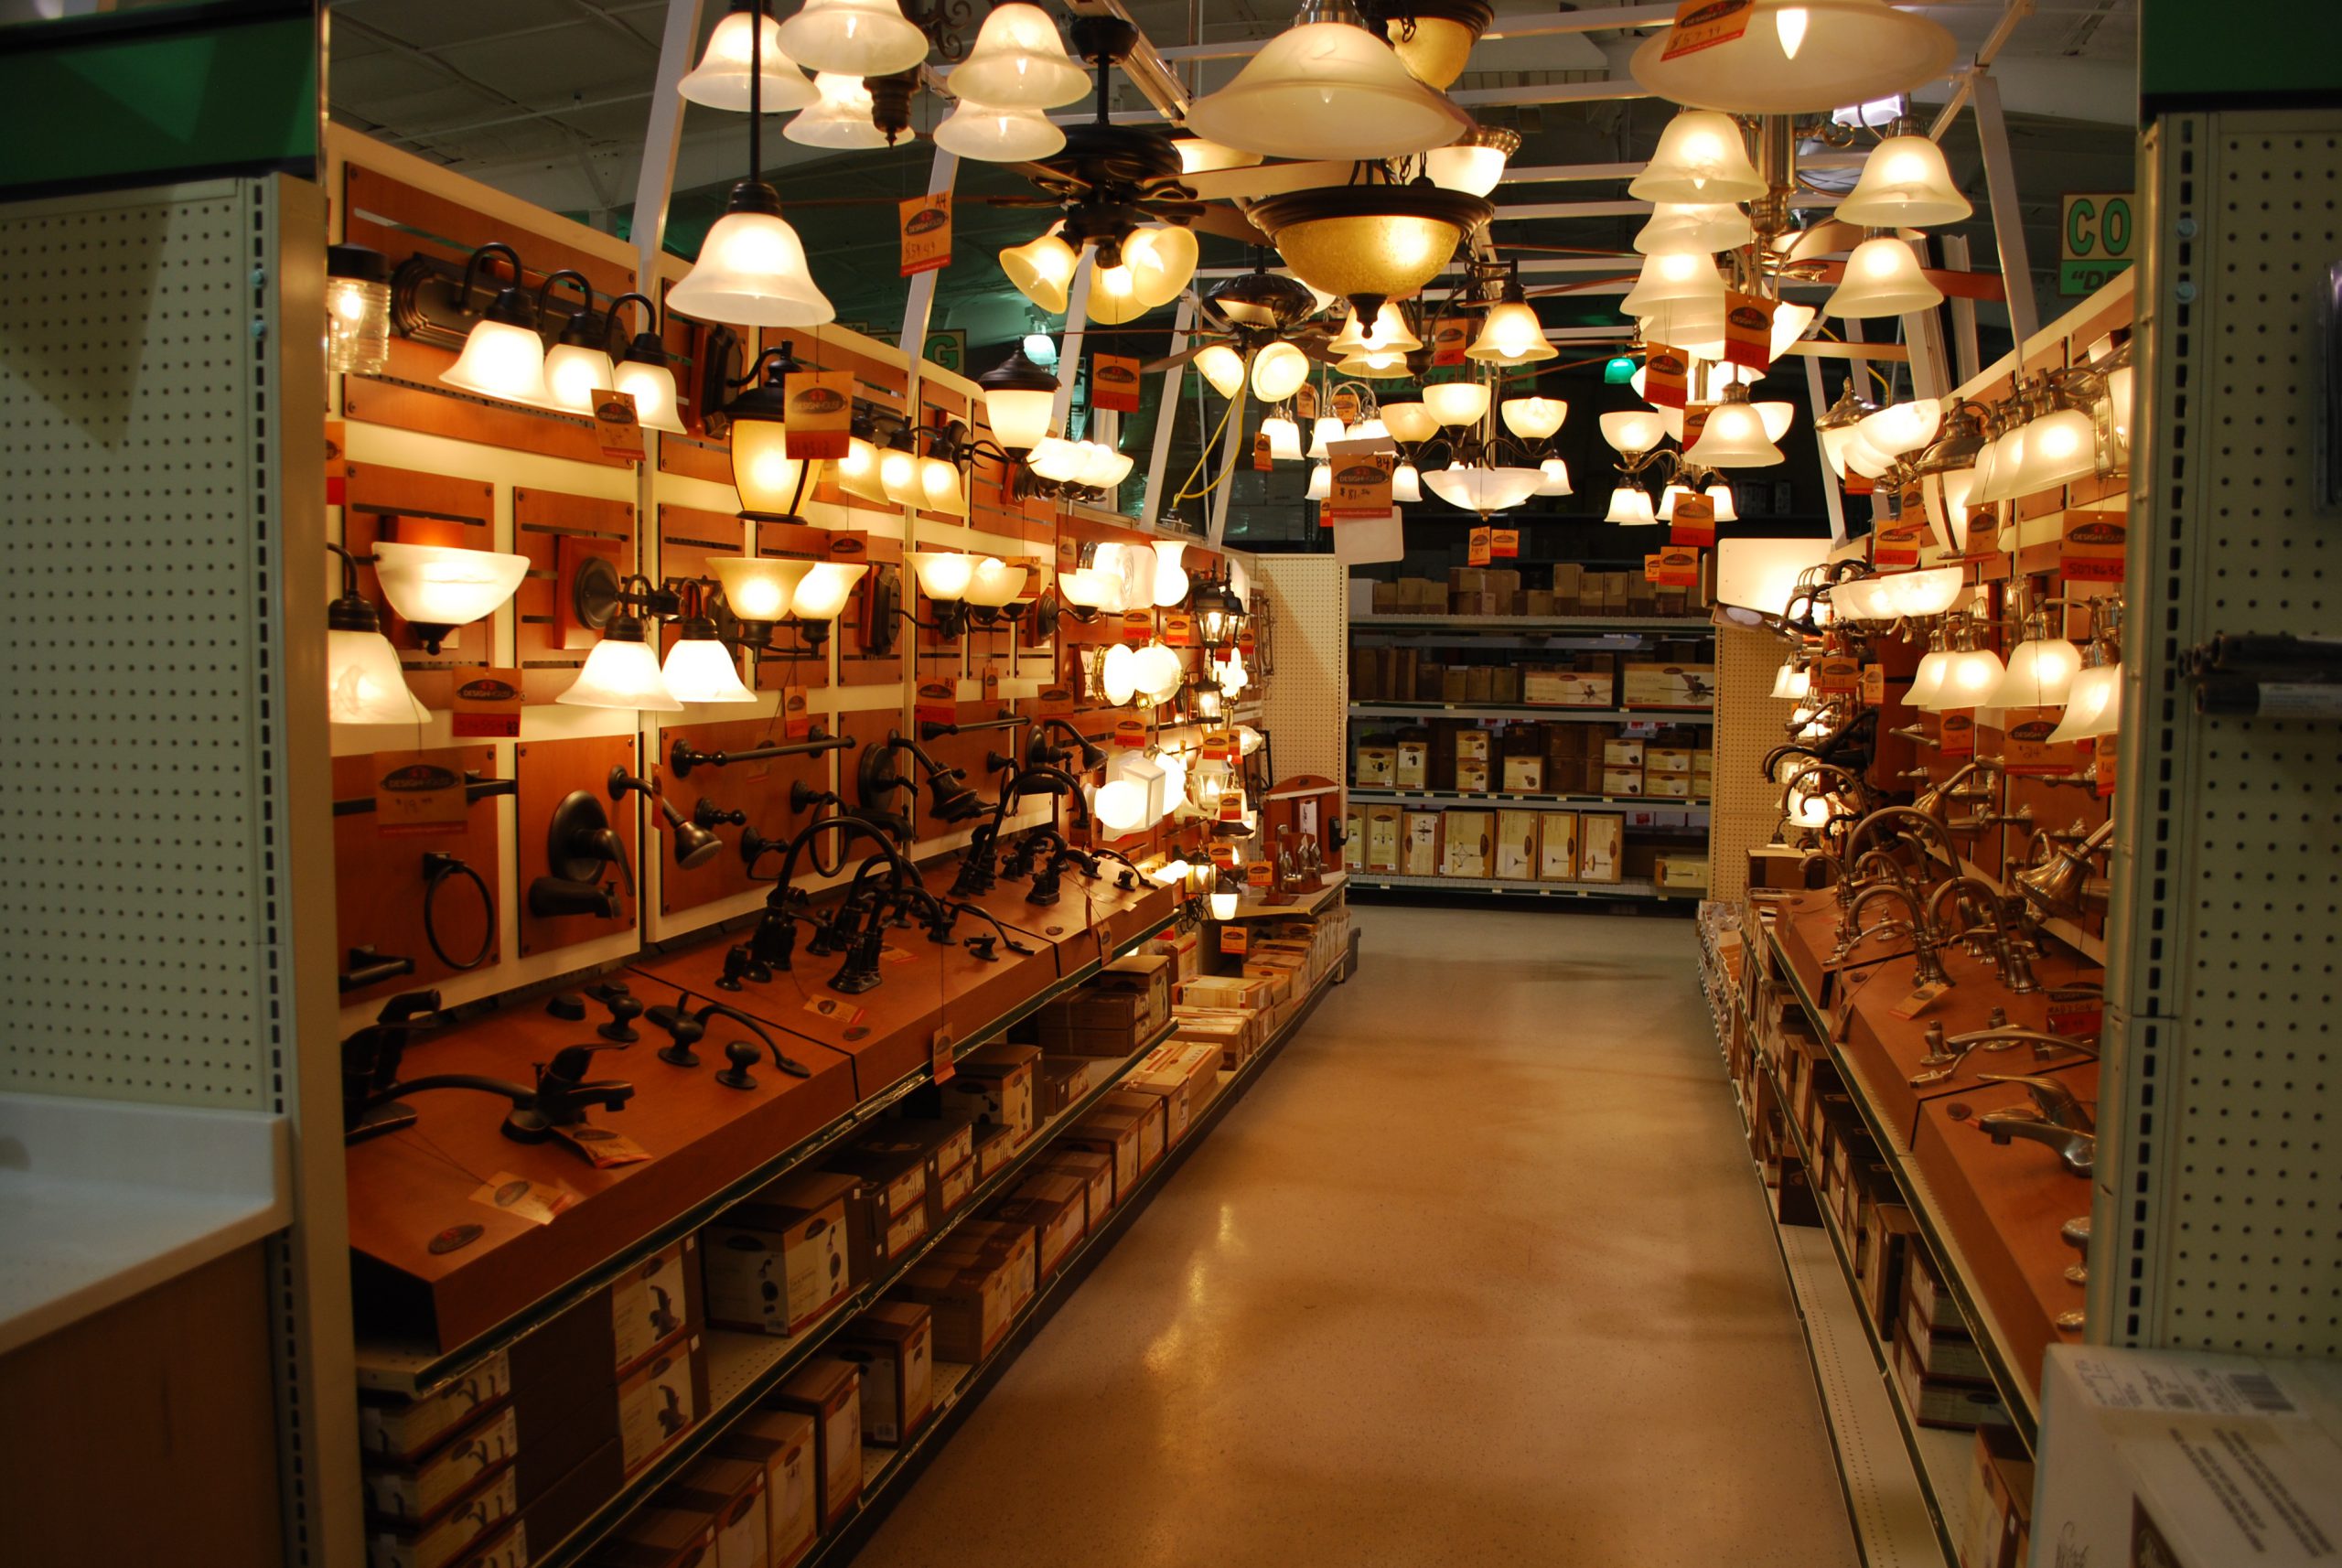 Hardware store aisle with light fixtures and product promotion